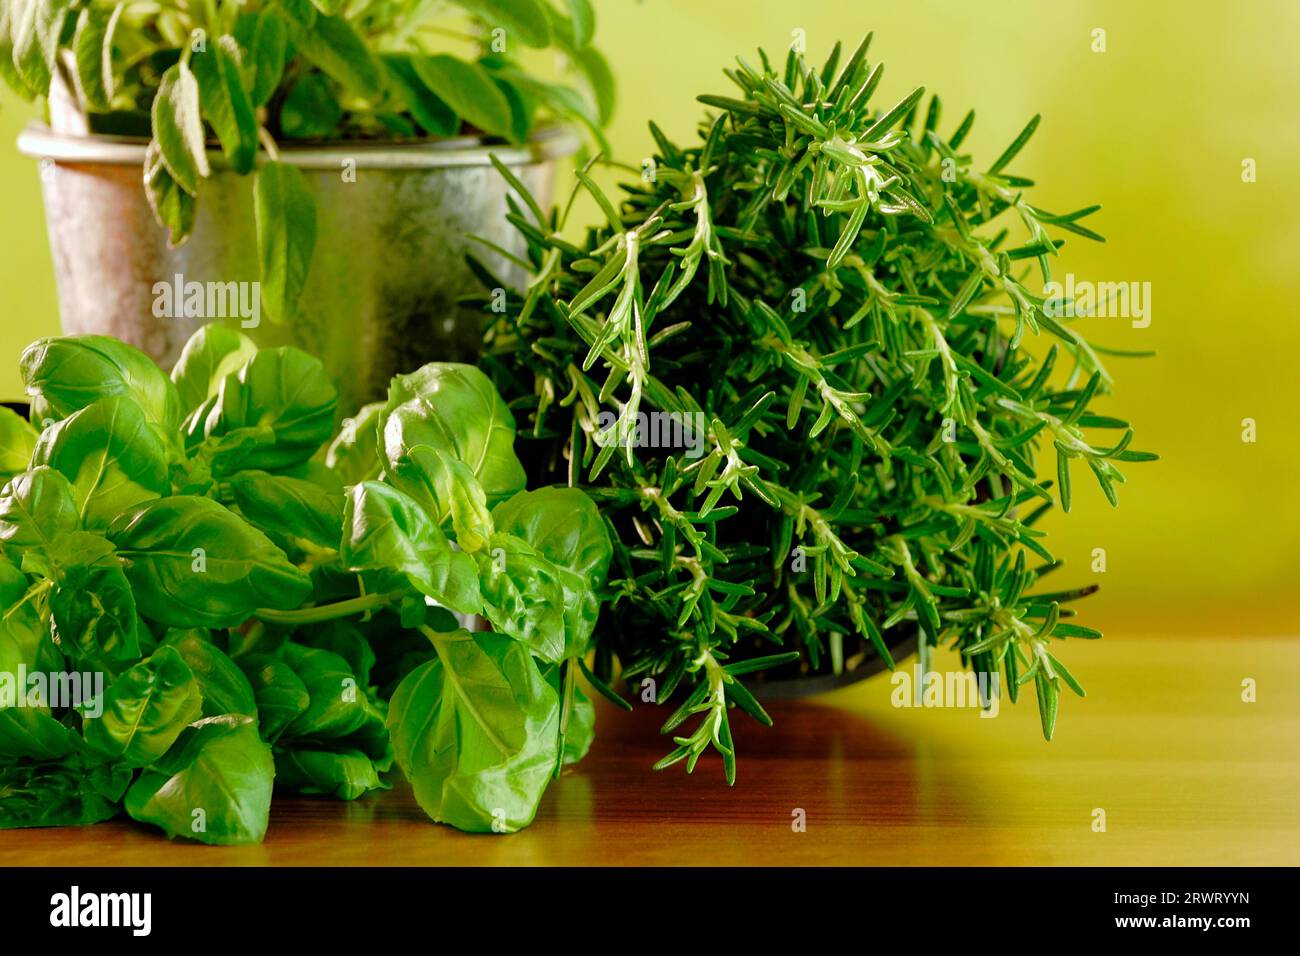 Basil, rosemary and sage in a pot against a green background. Basil and Rosemary in front of a green background Stock Photo